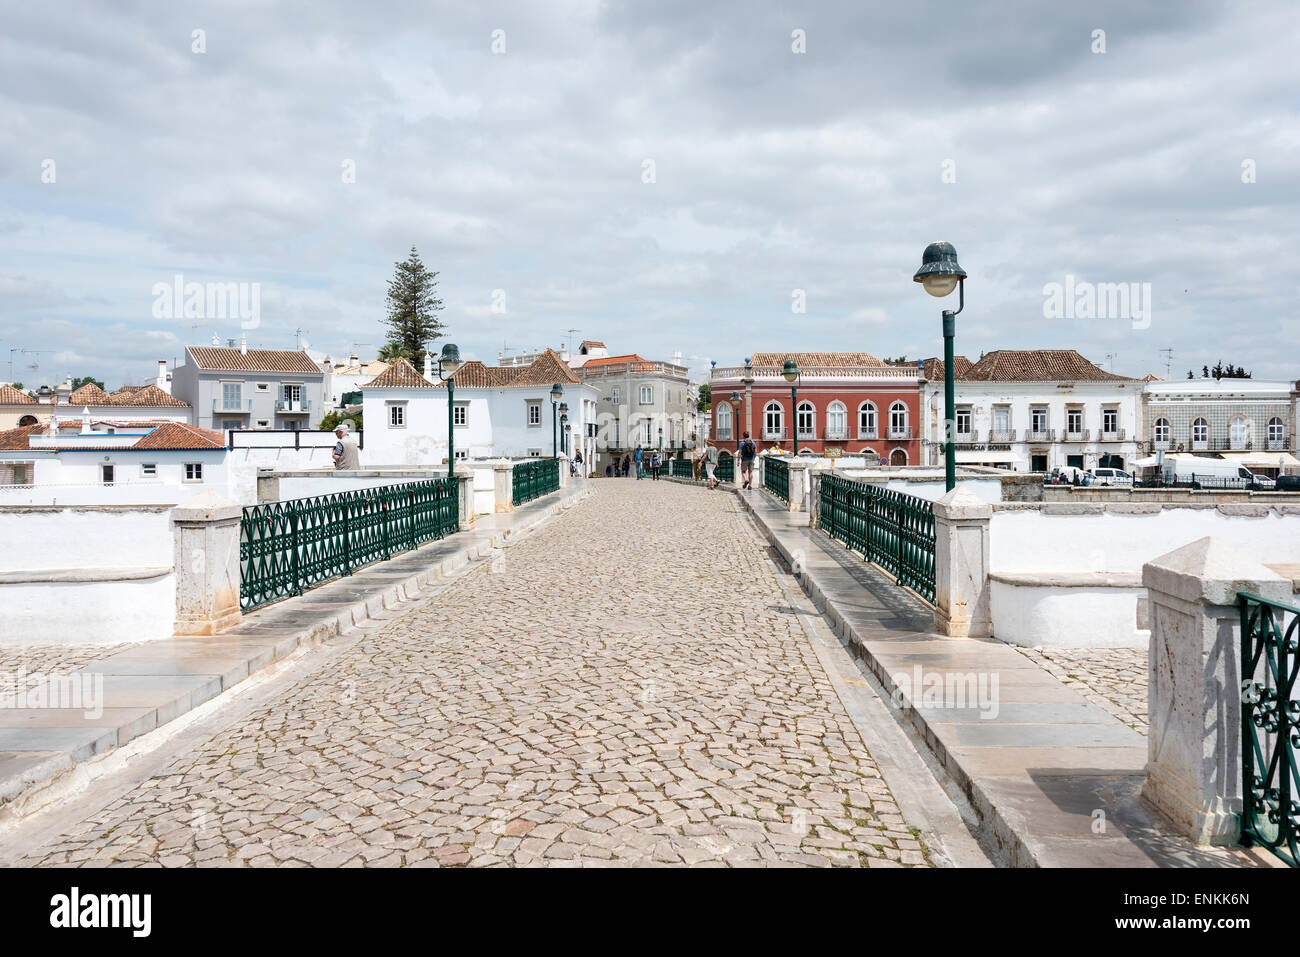 TAVIRA,PORTUGAL-APRIL17, 2015: view on the old houses and bridge of the old town Tavira in the south of Portugal on April 17 201 Stock Photo